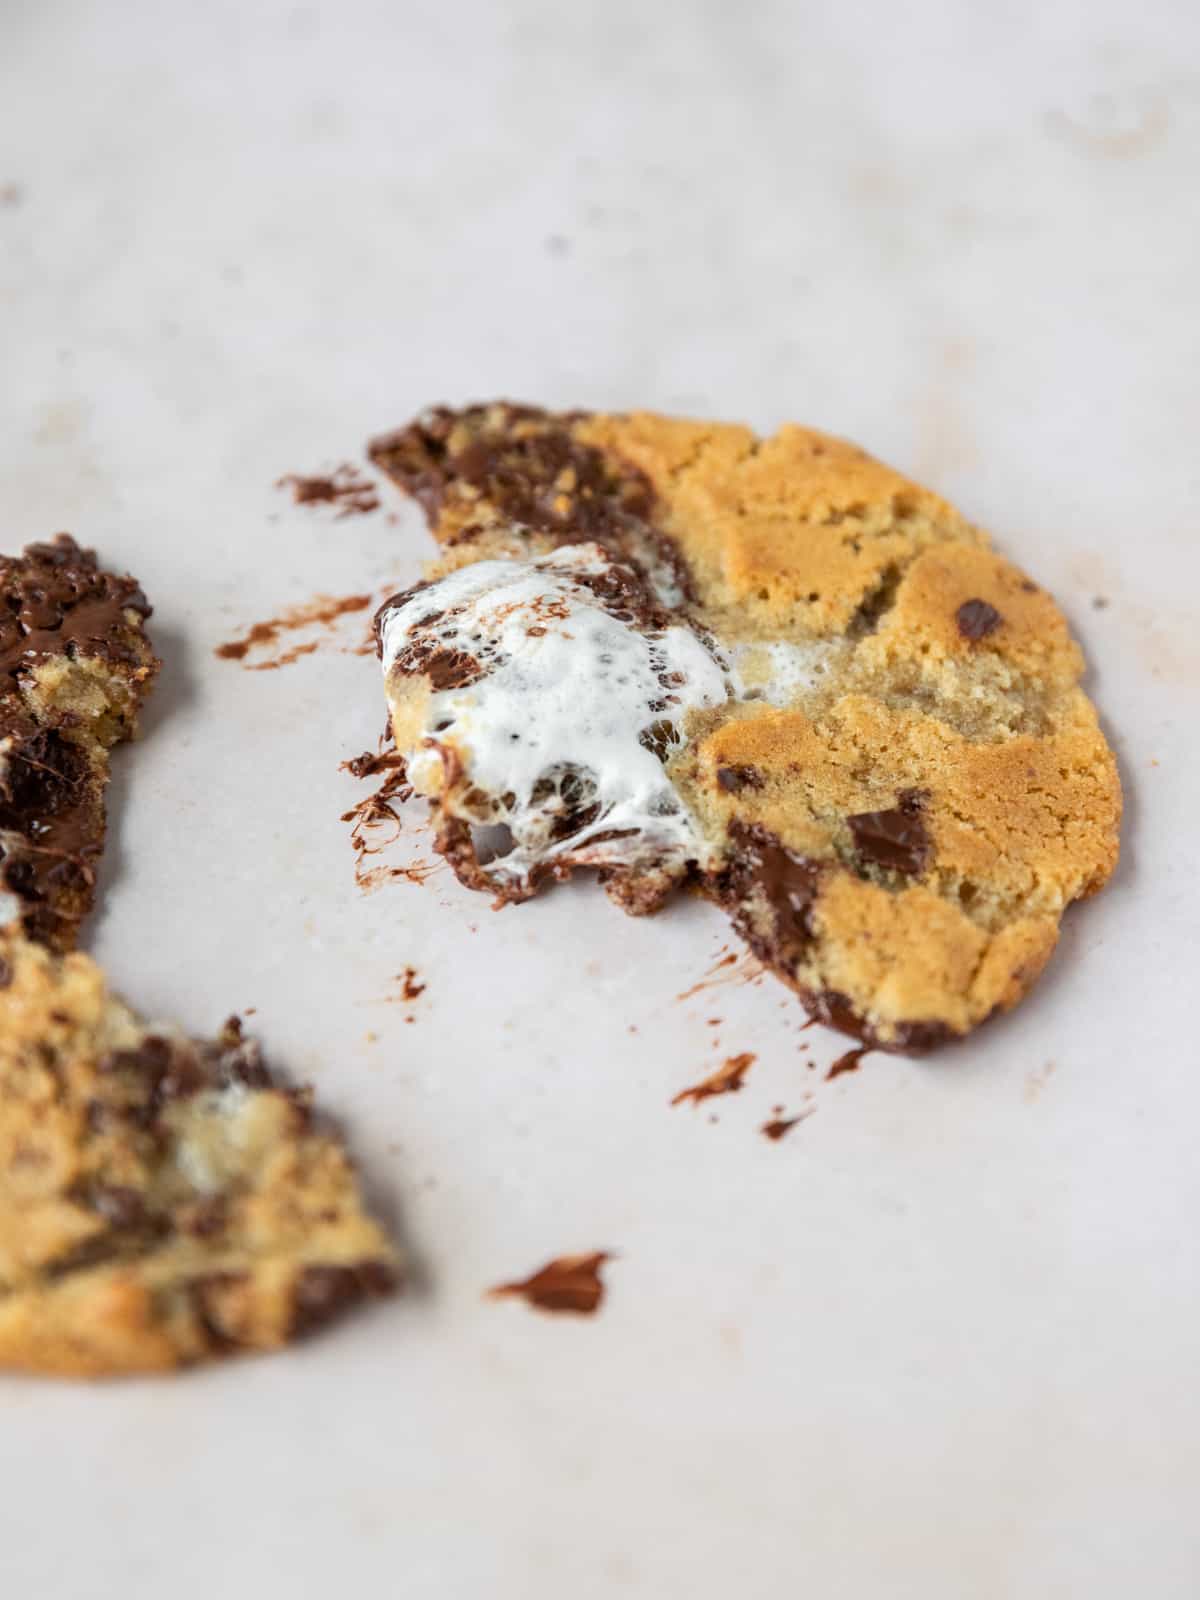 a s'mores stuffed cookie split in half with smears of chocolate by it on a tan background.